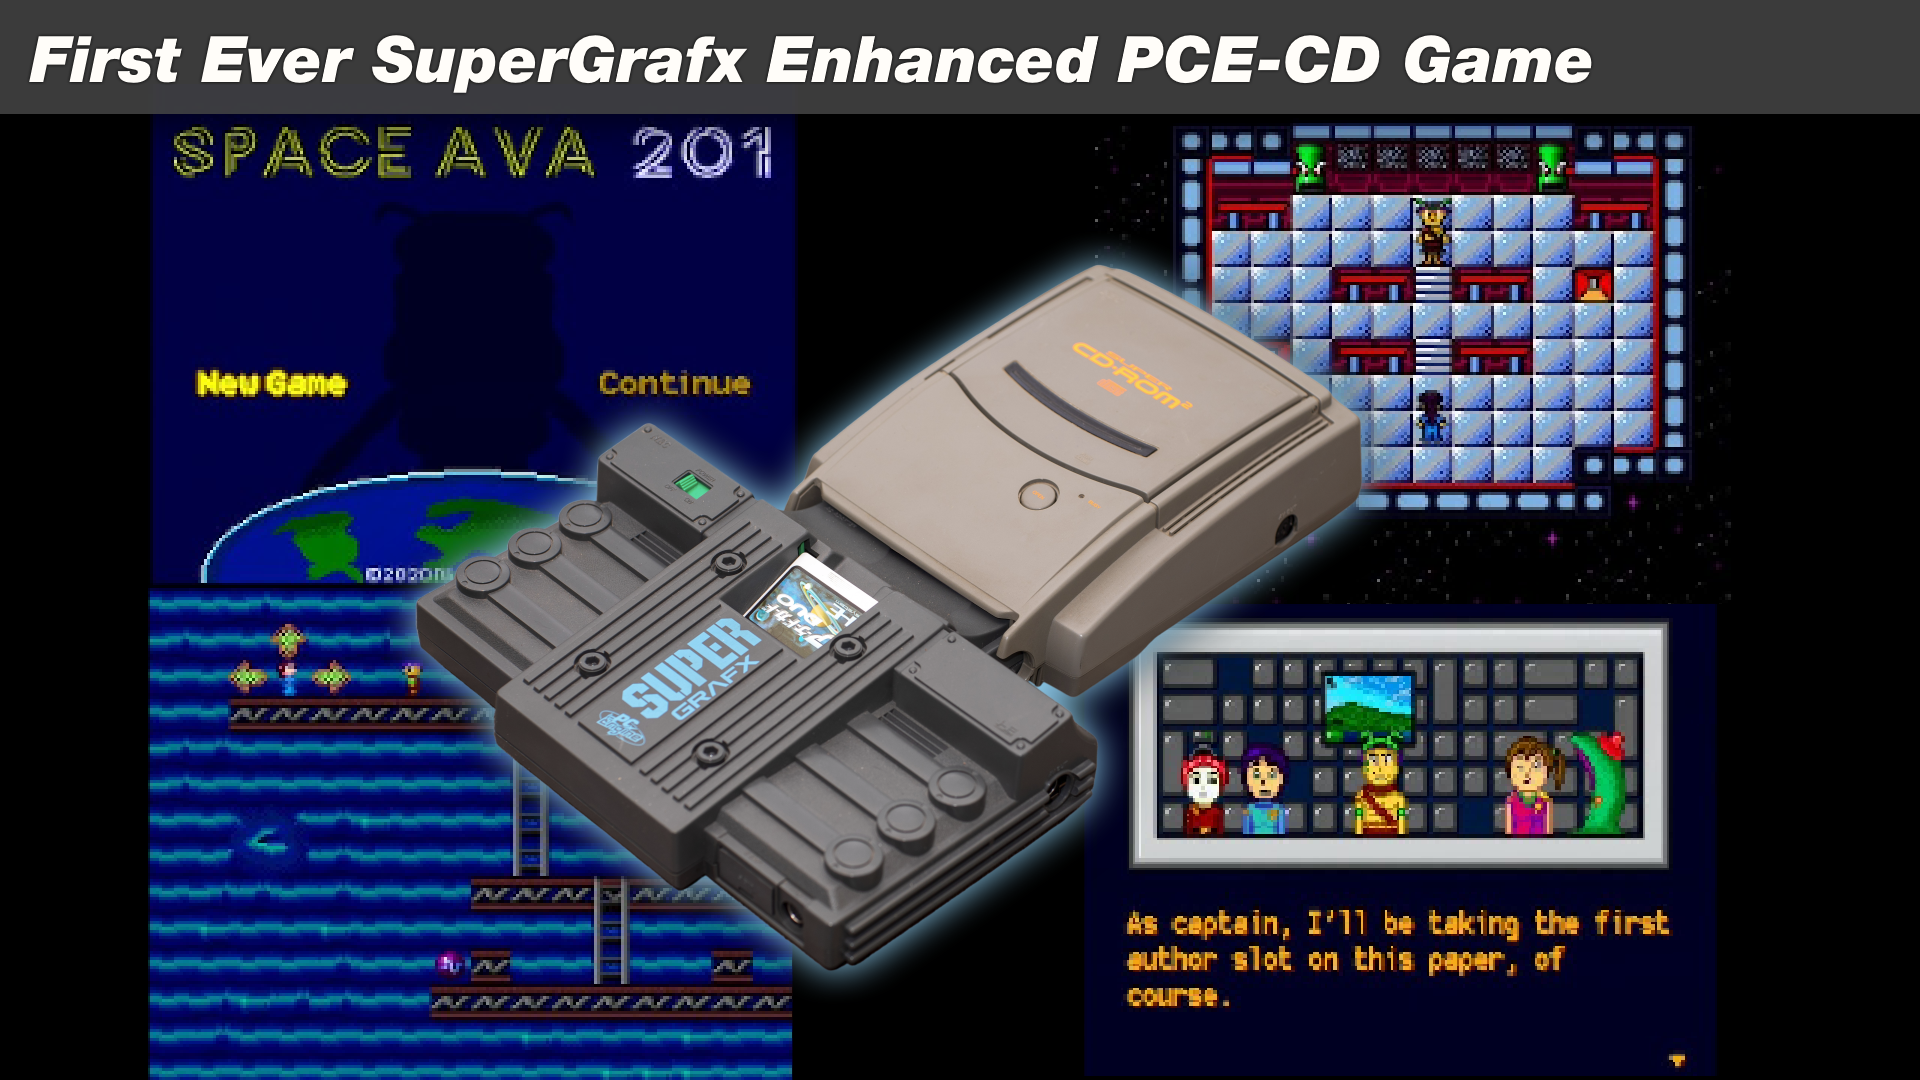 Space Ava 201: The First PC Engine CD Game With SuperGrafx Enhancements, and Arcade Card